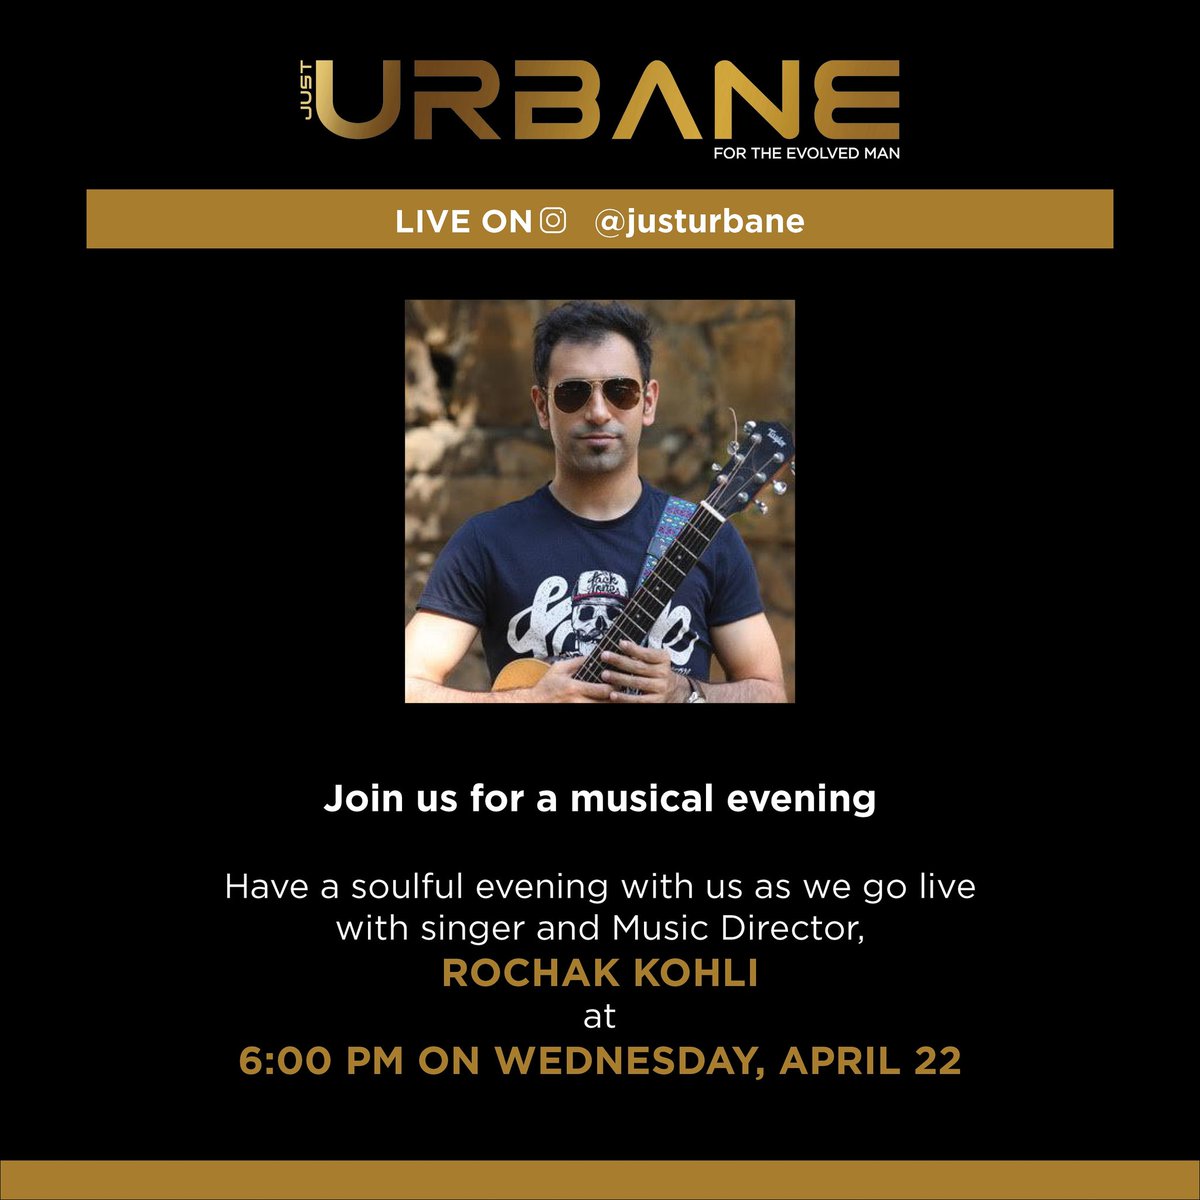 Have a soulful musical evening with us as we go live with Singer and Music director Rochak Kohli (@RochakTweets) at 6pm on 22nd April.
Follow our Instagram page @justurbane to join the live conversation

@UrbaneJets

#justurbane #evolvedman #rochakkohli #instalive #singer #music